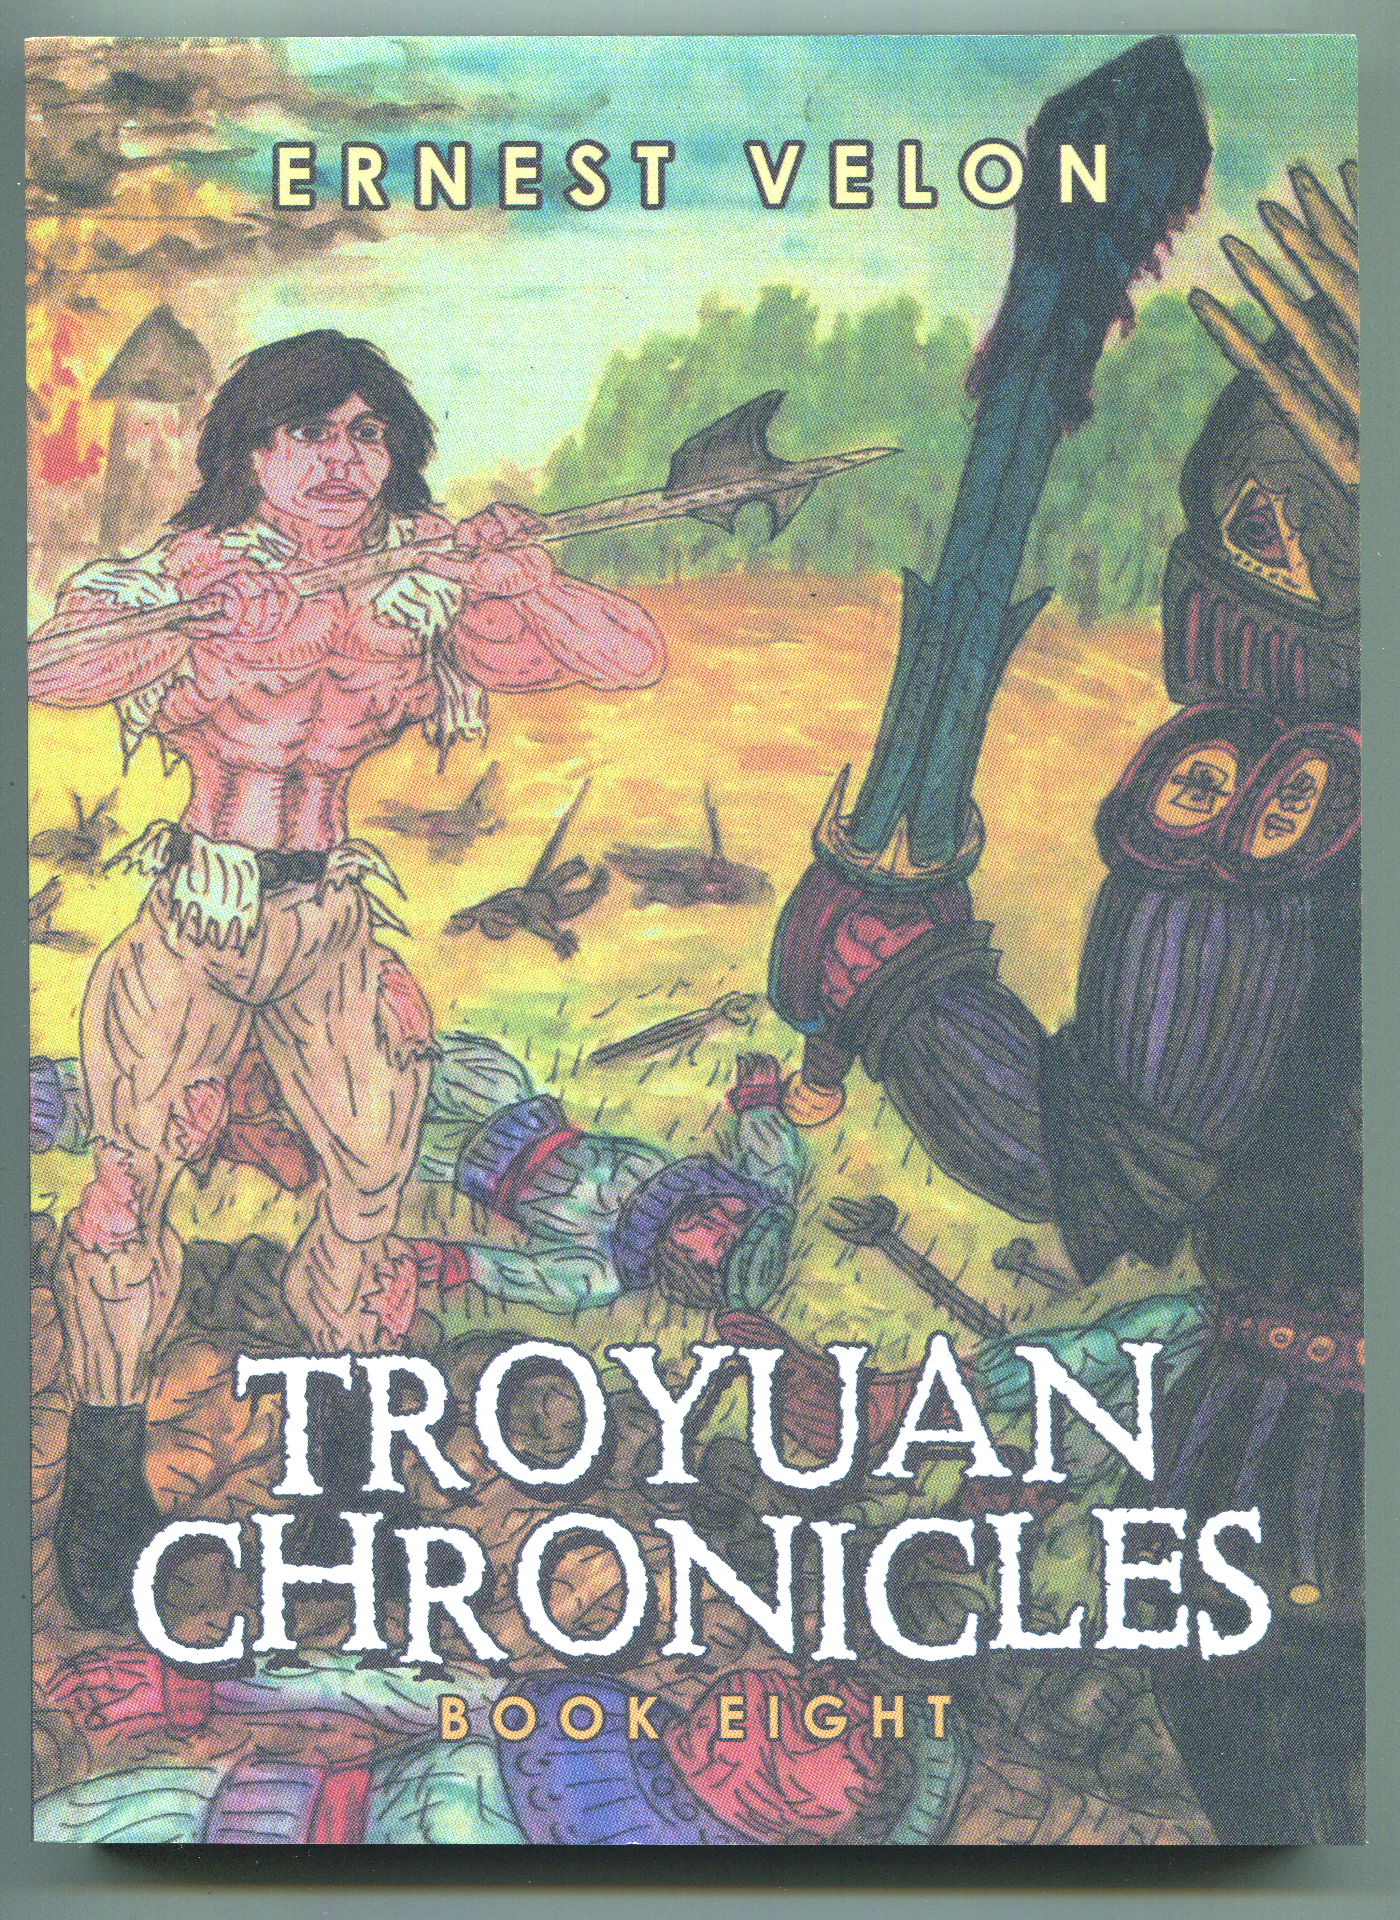 The Troyuan Chronicles... Book Eight